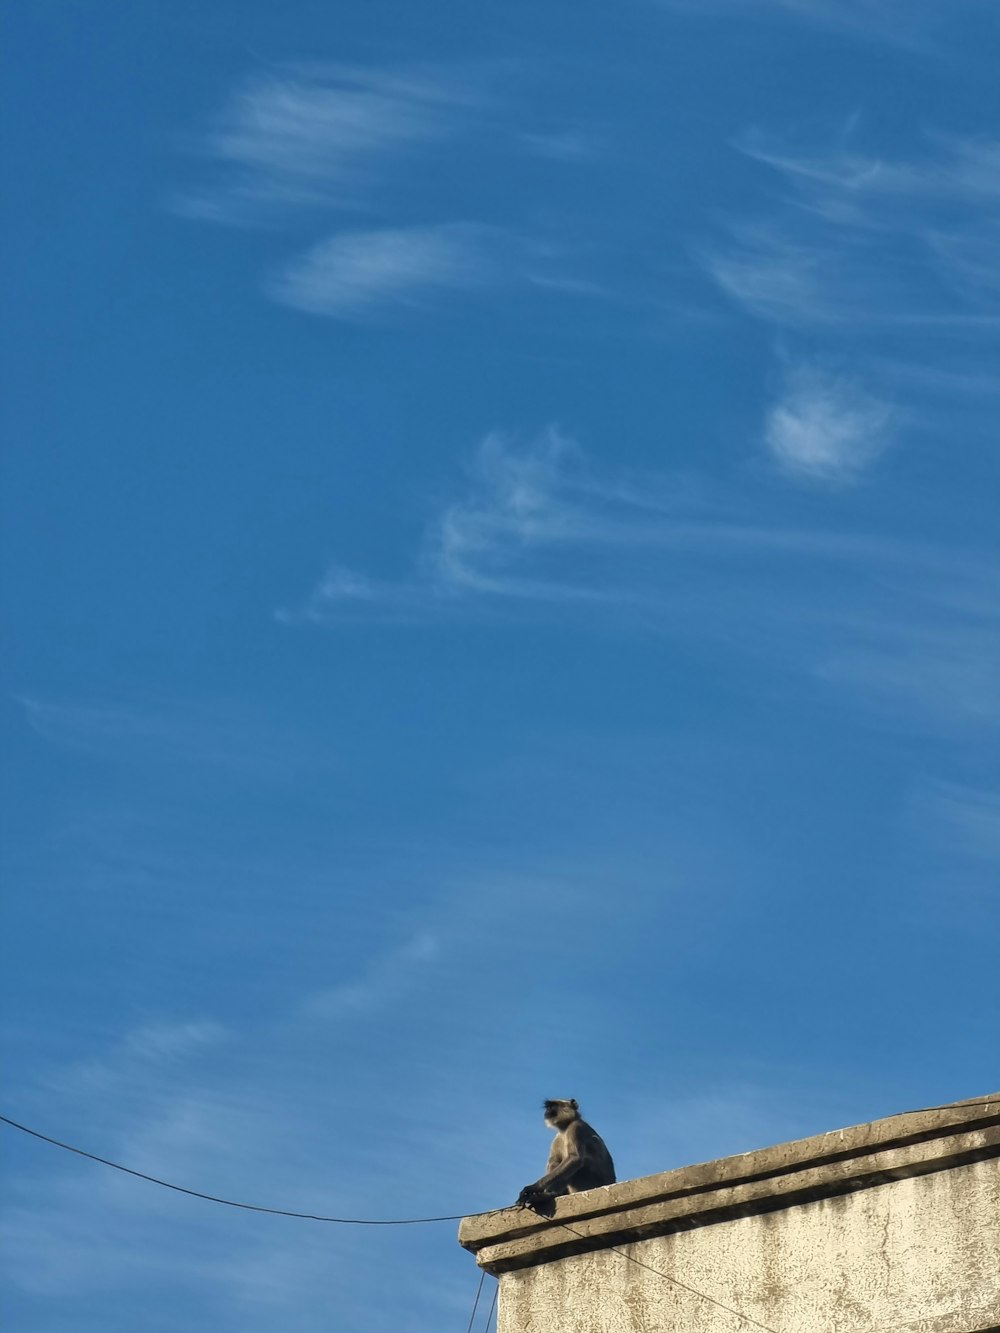 a cat sitting on top of a building under a blue sky